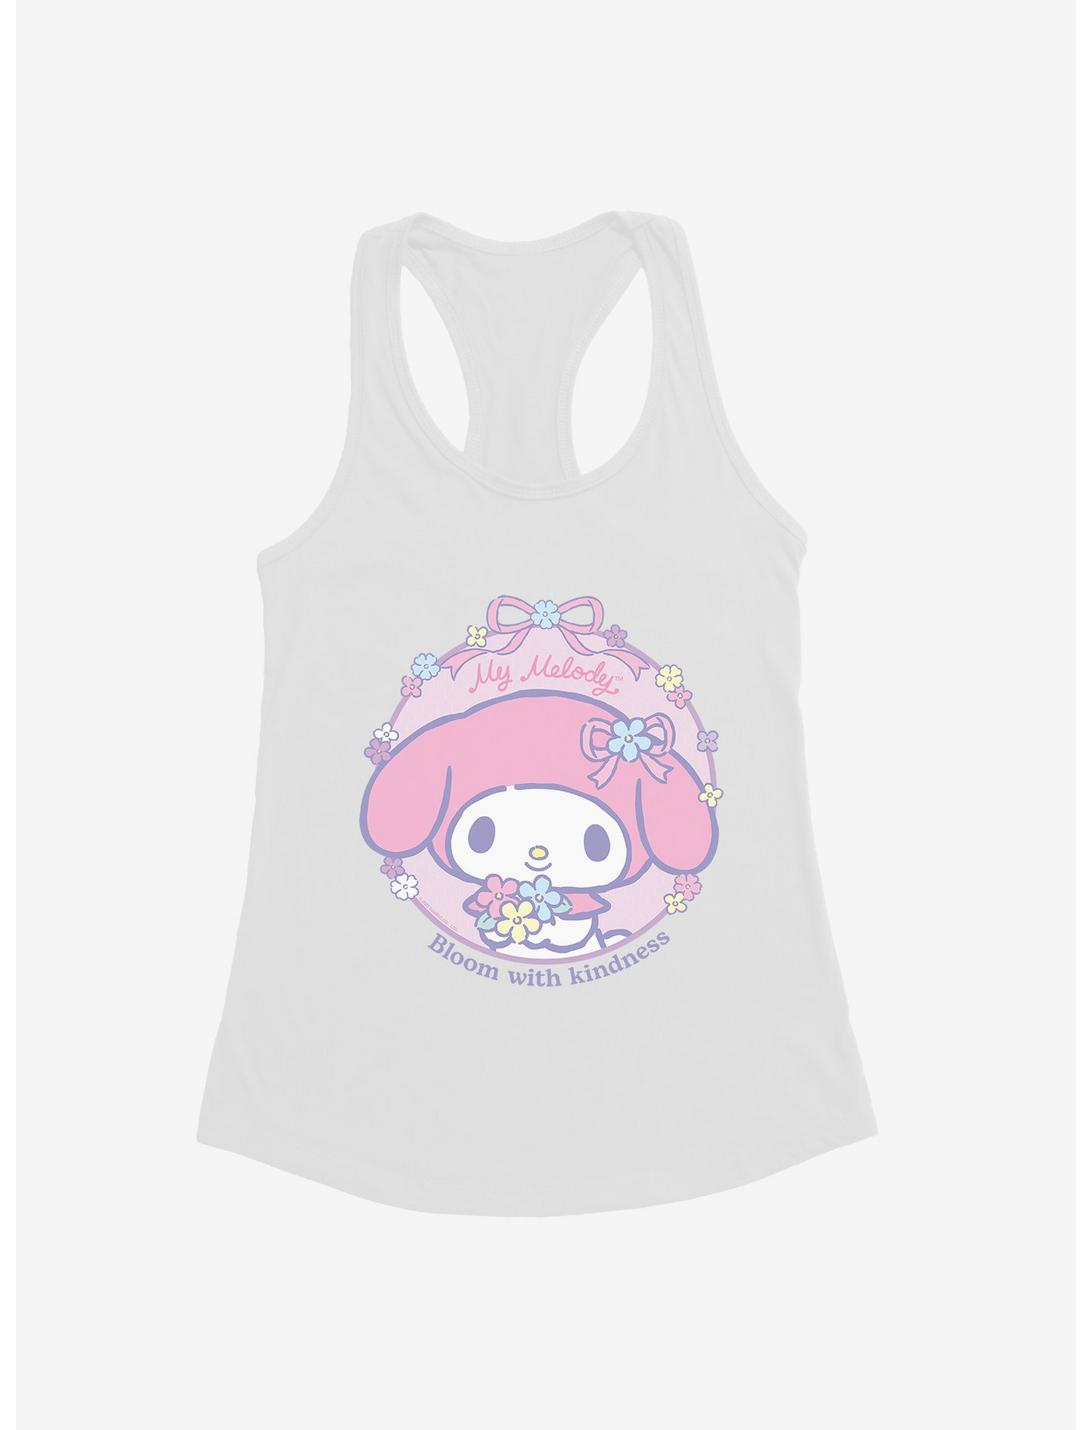 My Melody Bloom With Kindness Womens Tank Top, WHITE, hi-res